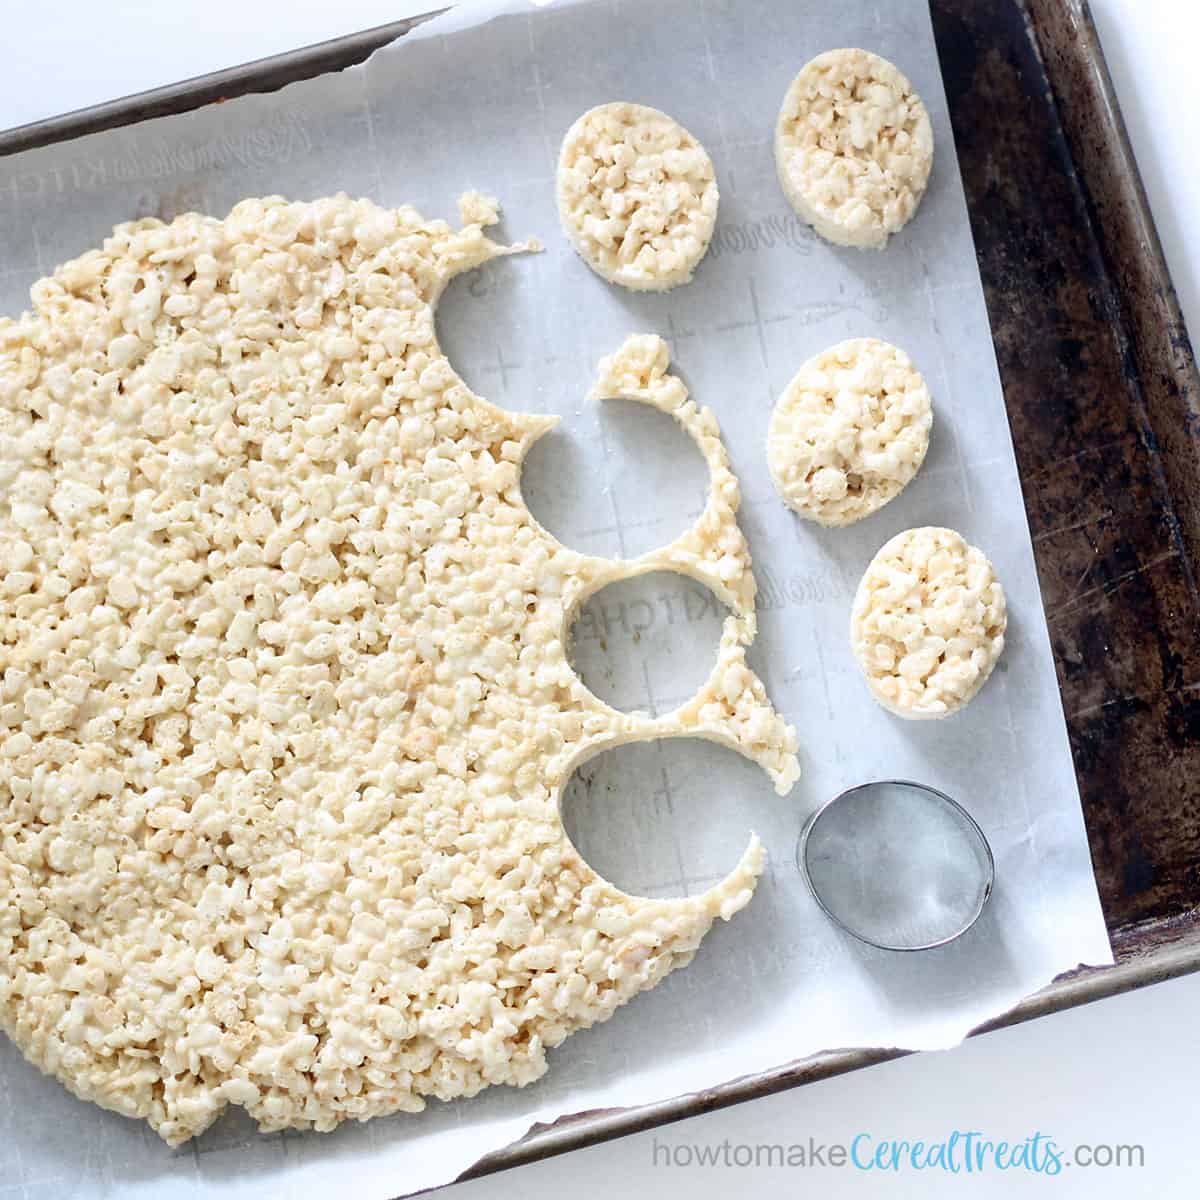 Oval cookie cutter and cutting out rice krispie treats